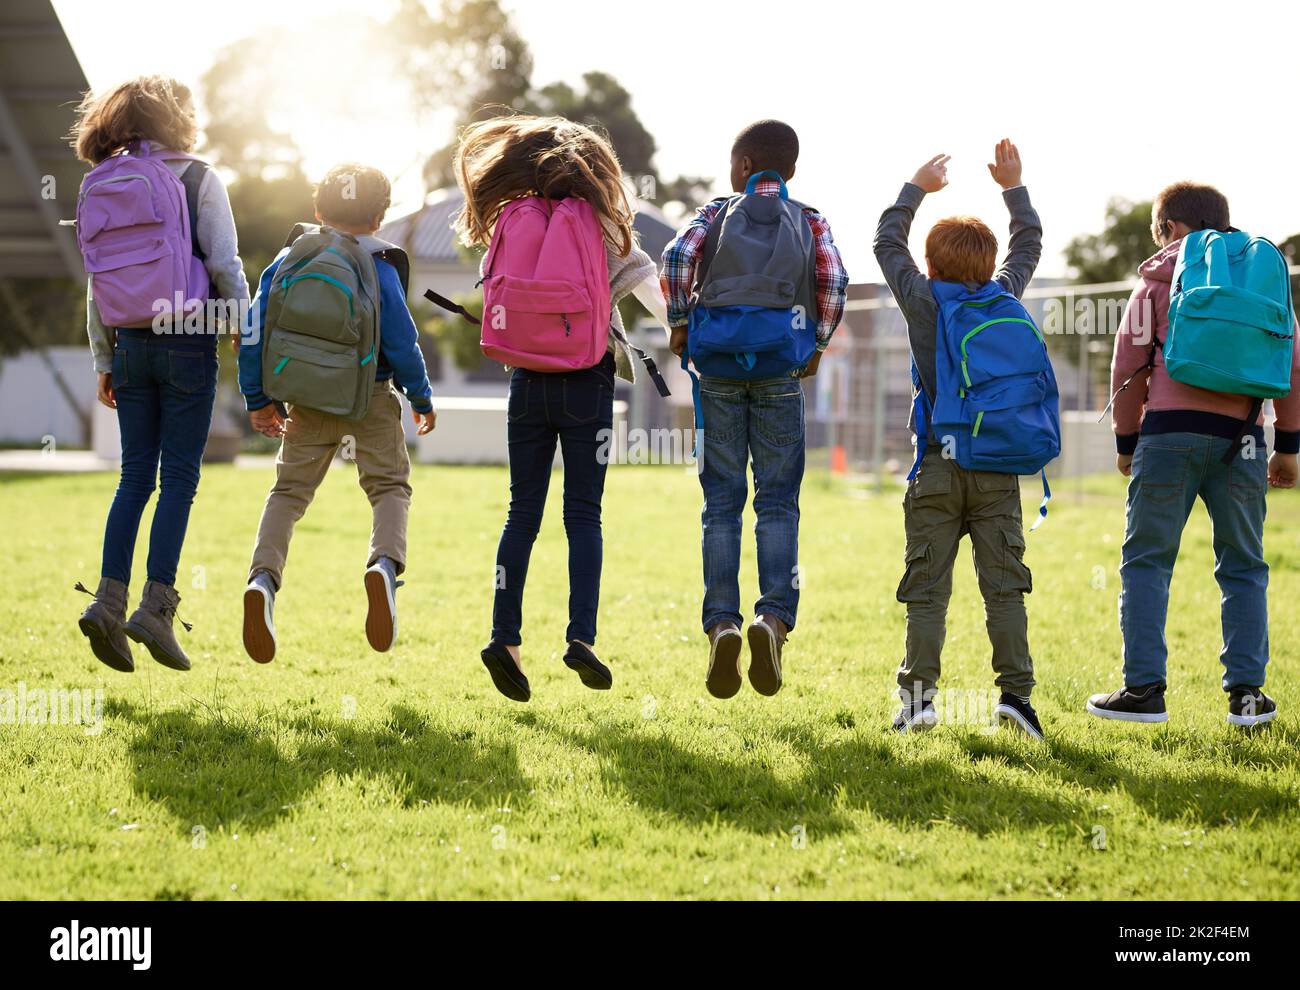 Jump for joy, its holiday. Shot of young kids playing together outdoors. Stock Photo